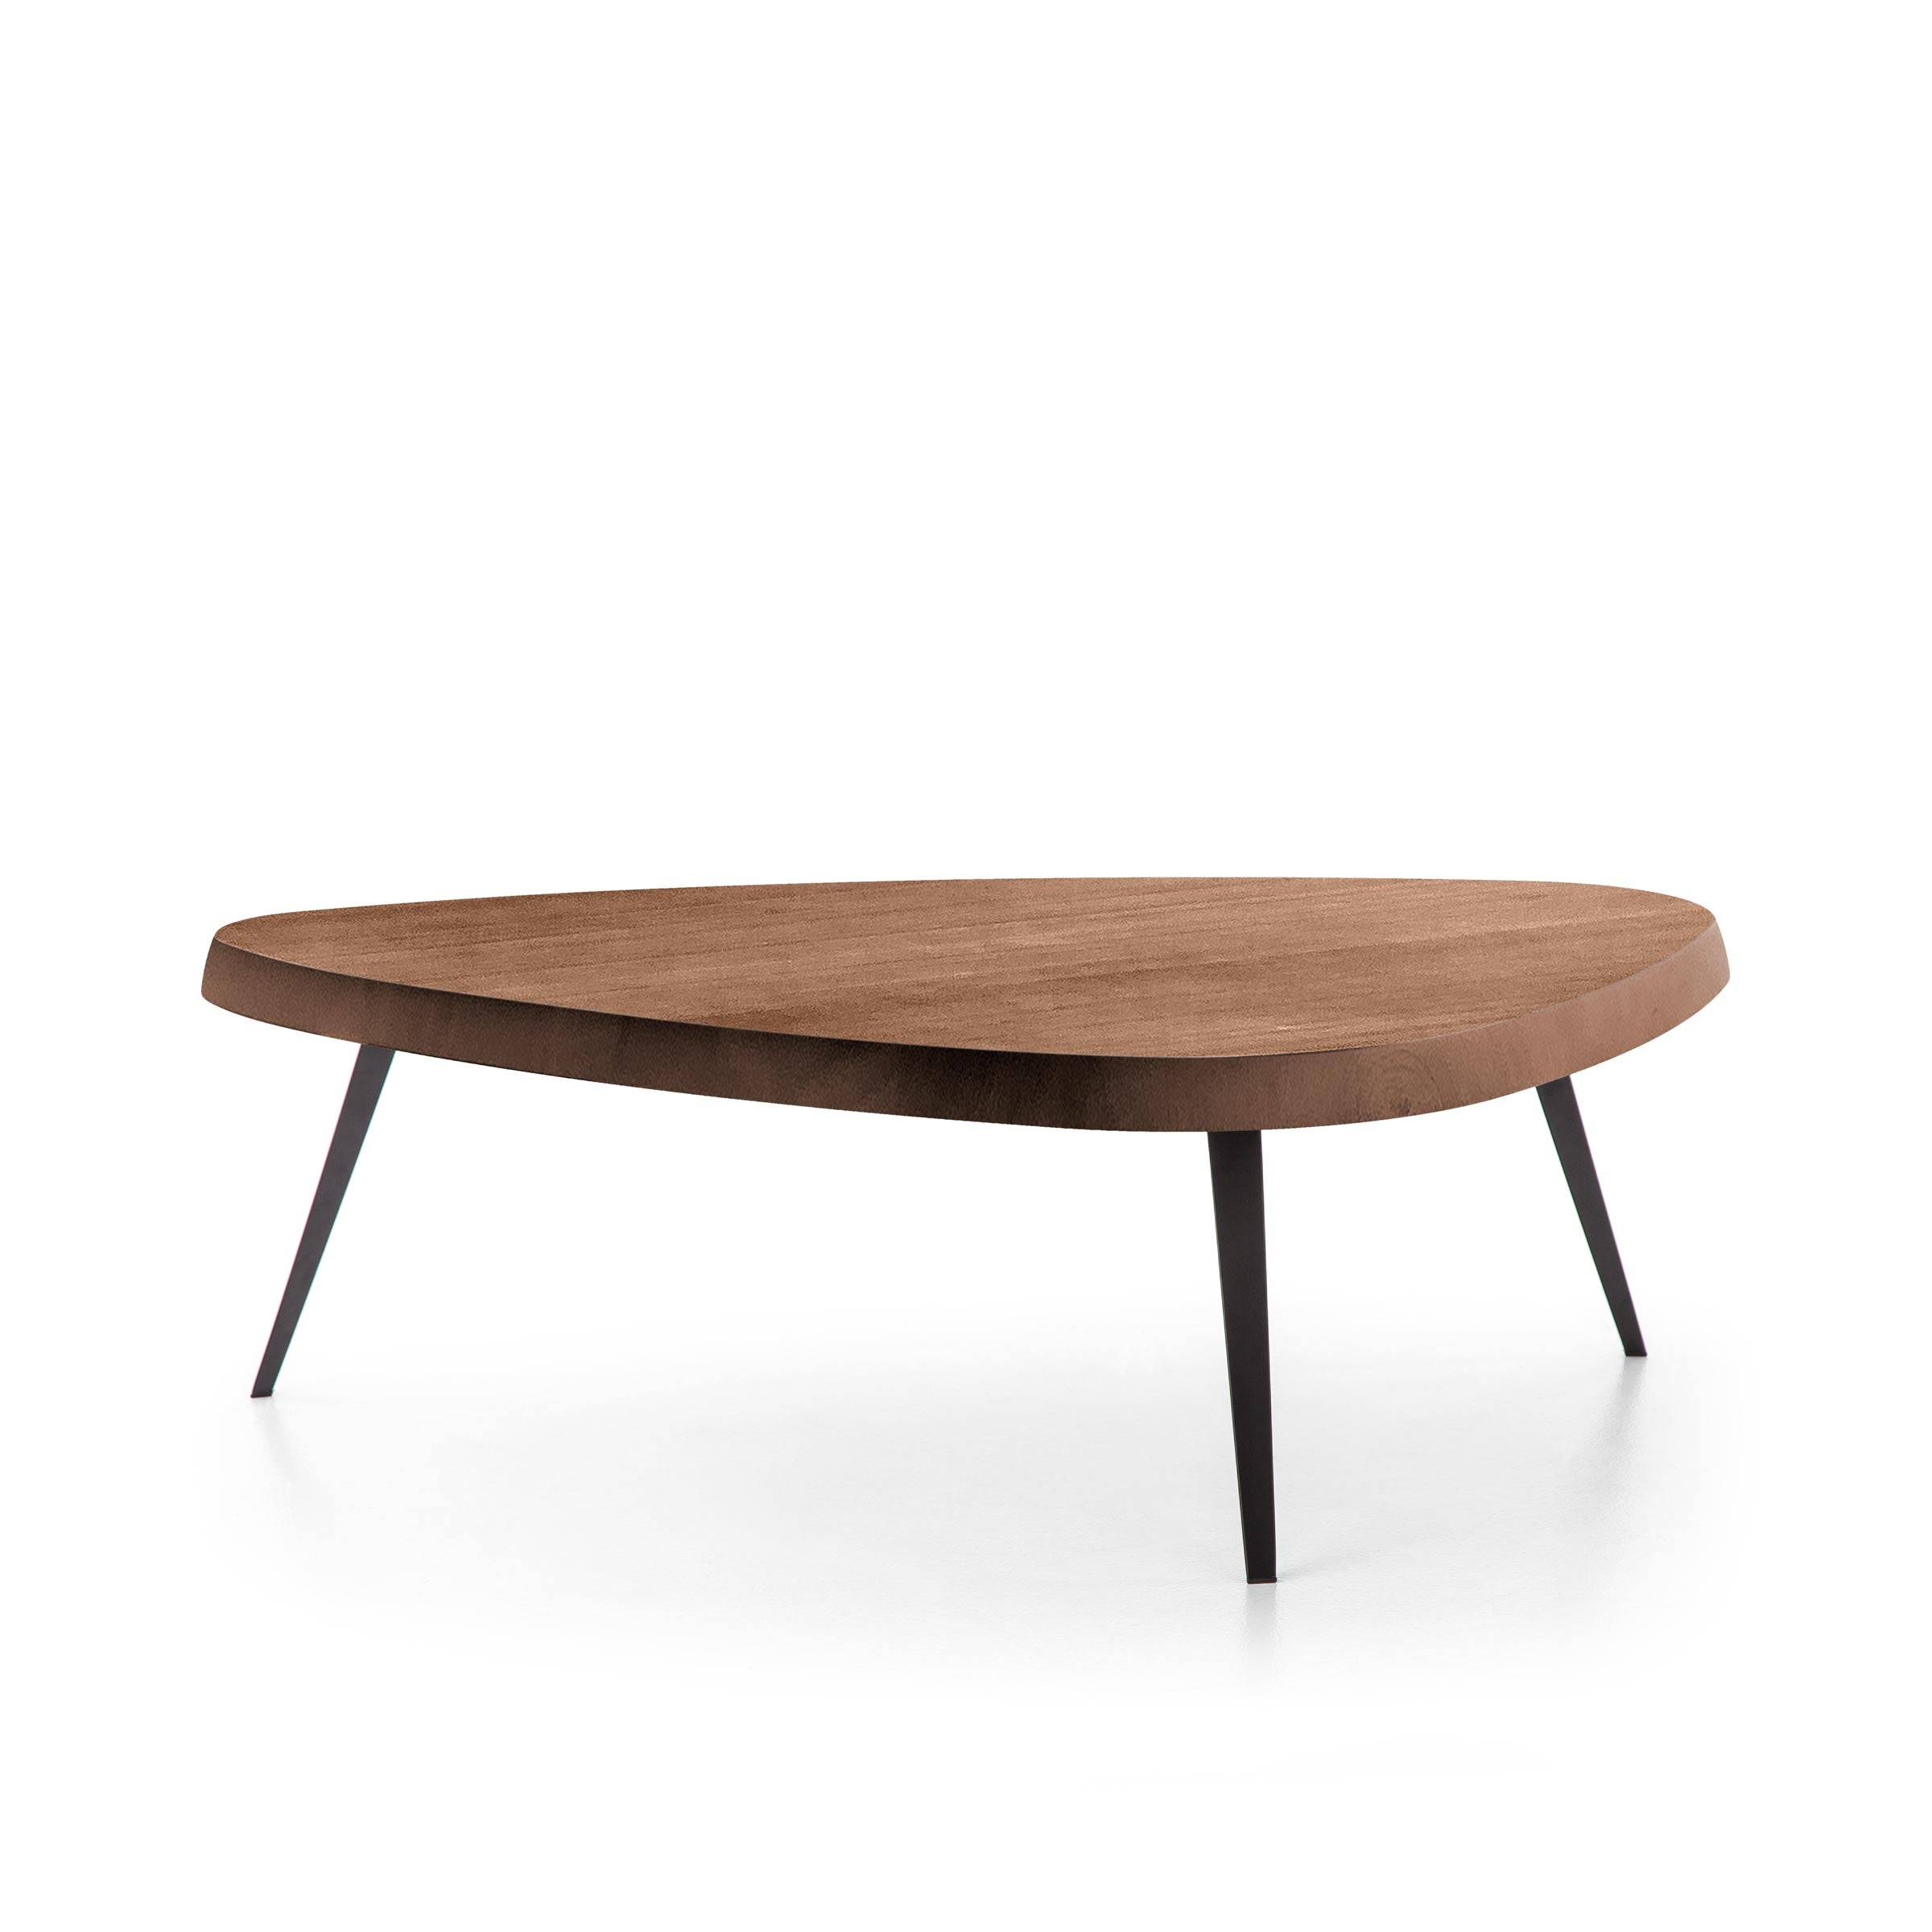 Wooden Coffee Table MEXIQUE by Charlotte Perriand for Cassina